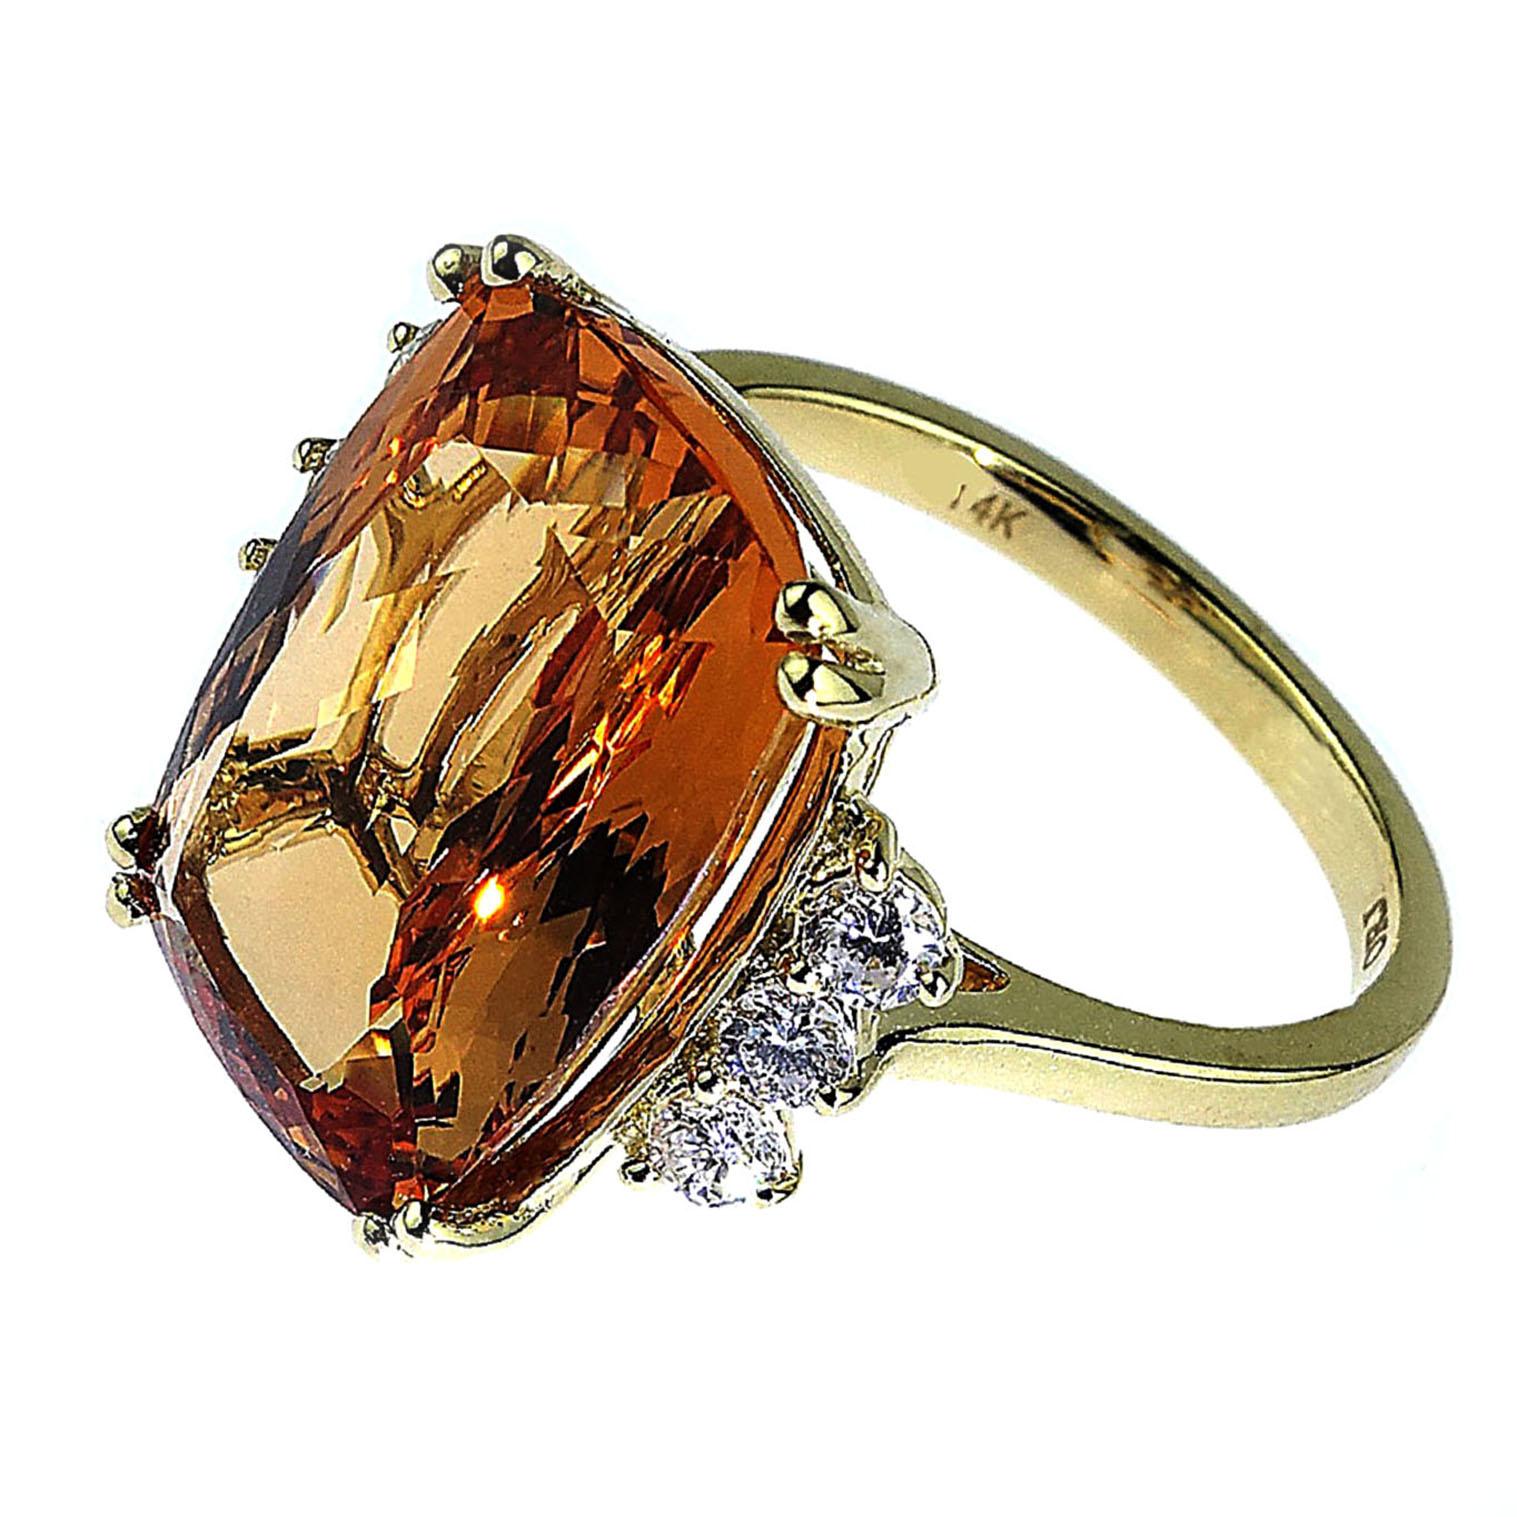 Stunningly beautiful peachy/orange rectangular cushion cut Imperial Topaz with Diamond accents ring.  This gorgeous Brazilian Imperial Topaz of 9.83 carats is accented with .29 carats of sparkling Diamonds.  The handmade 14kt yellow gold mounting is